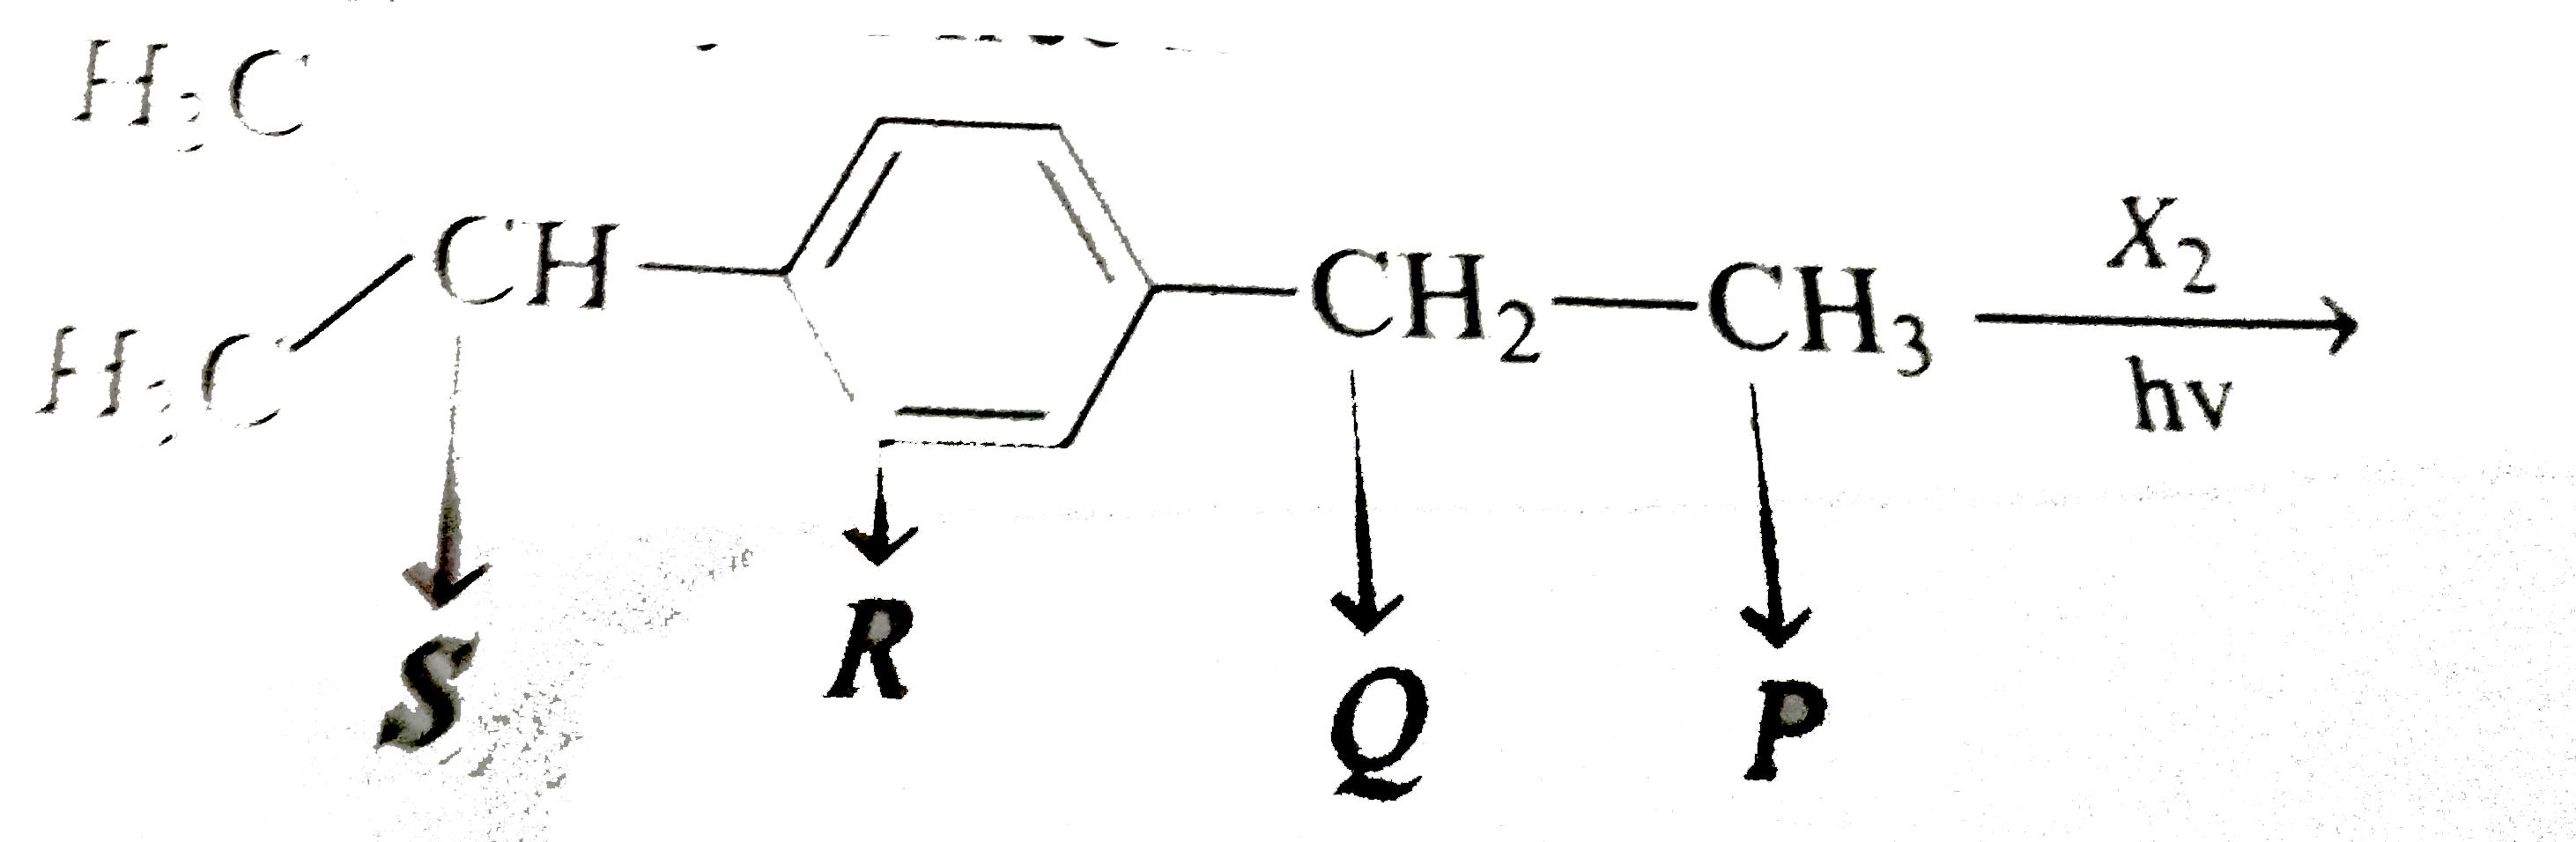 Free radical substitution chalcogenation is hown by the compunds having least one H-atom an sp^(3) hyvbridised carbon atom. Here substitution is due to free radical formation in presence of sunlight or heat or peroxide.The abstruction of H-atom is  on the basis of staability of free radical flrmed      In the above reaction how many monobrominated products are possible?